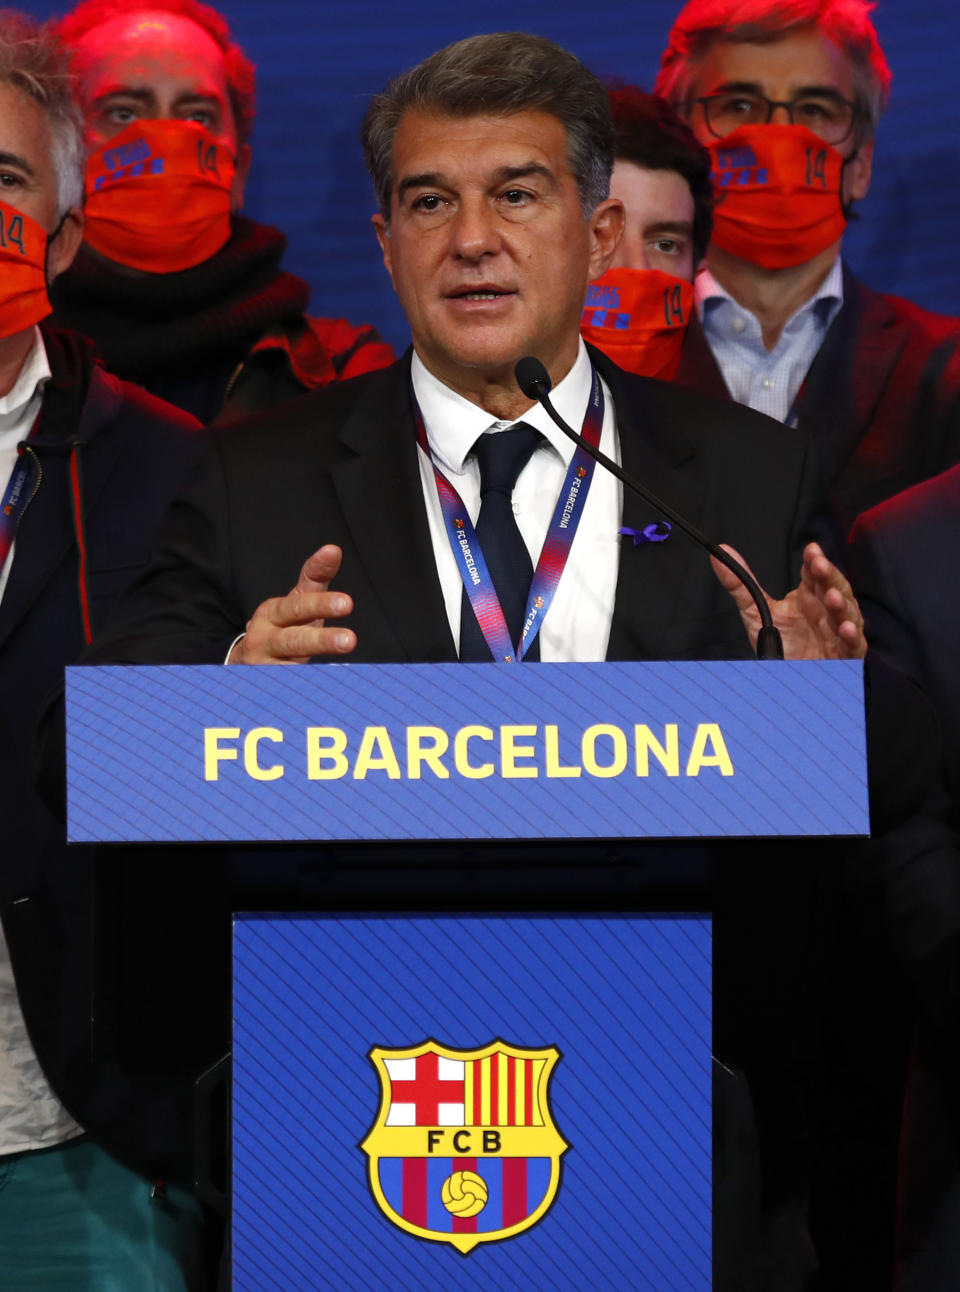 Joan Laporta celebrates his victory after elections at the Camp Nou stadium in Barcelona, Spain, Sunday, March 7, 2021. Joan Laporta has been elected Barcelona's president on Sunday, inheriting a club mired in debt and facing daunting problems that include the possible departure of Messi when his contract ends at the end of the season. (AP Photo/Joan Monfort)